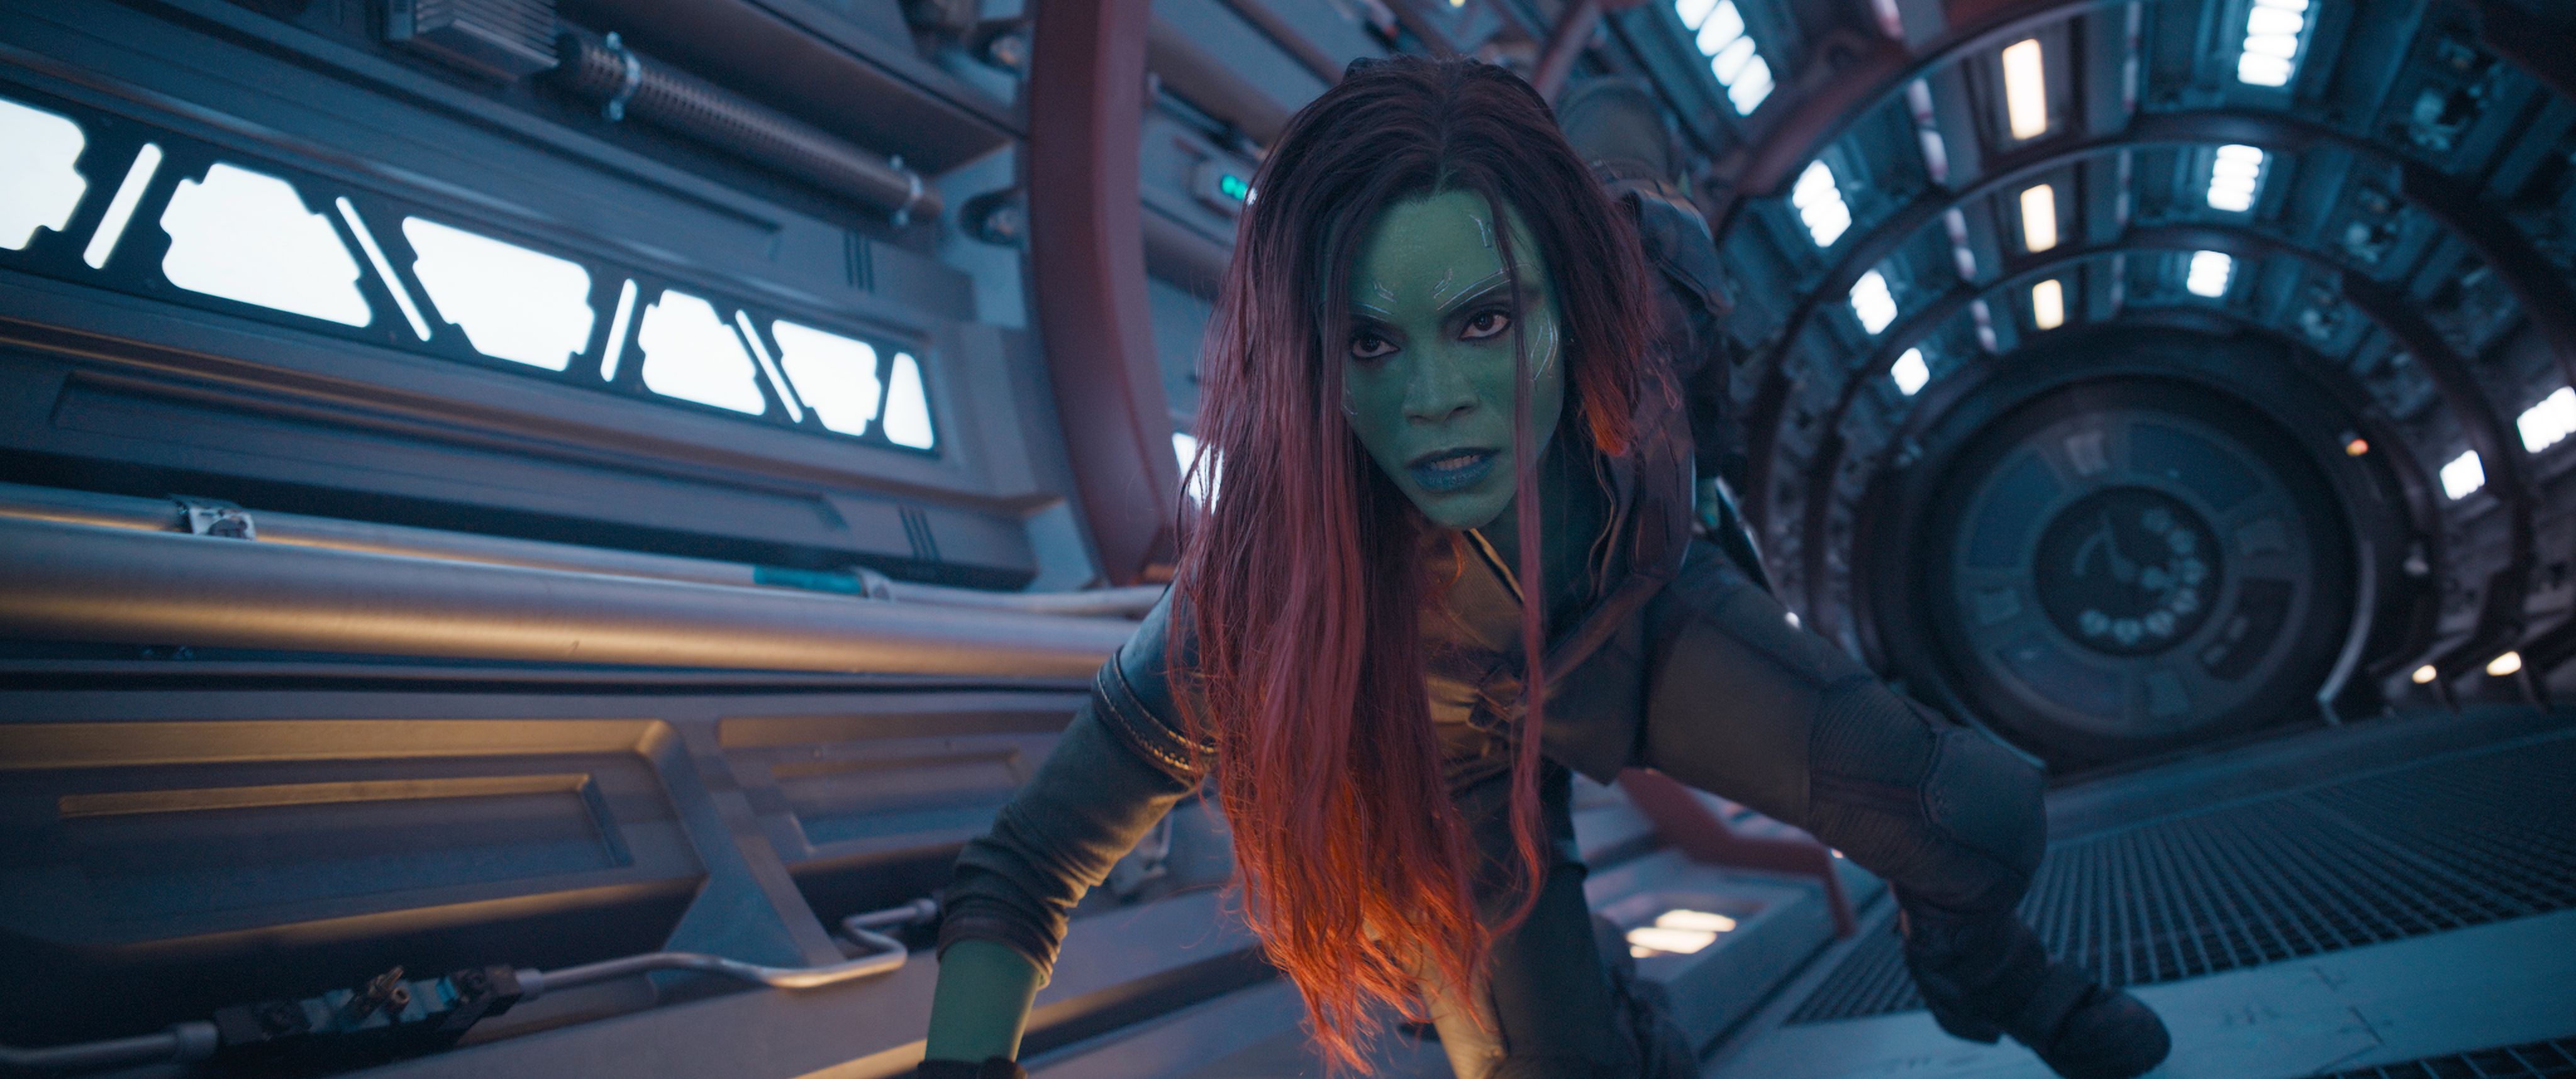 Guardians of the Galaxy 3 will have the MCU's first F-bomb